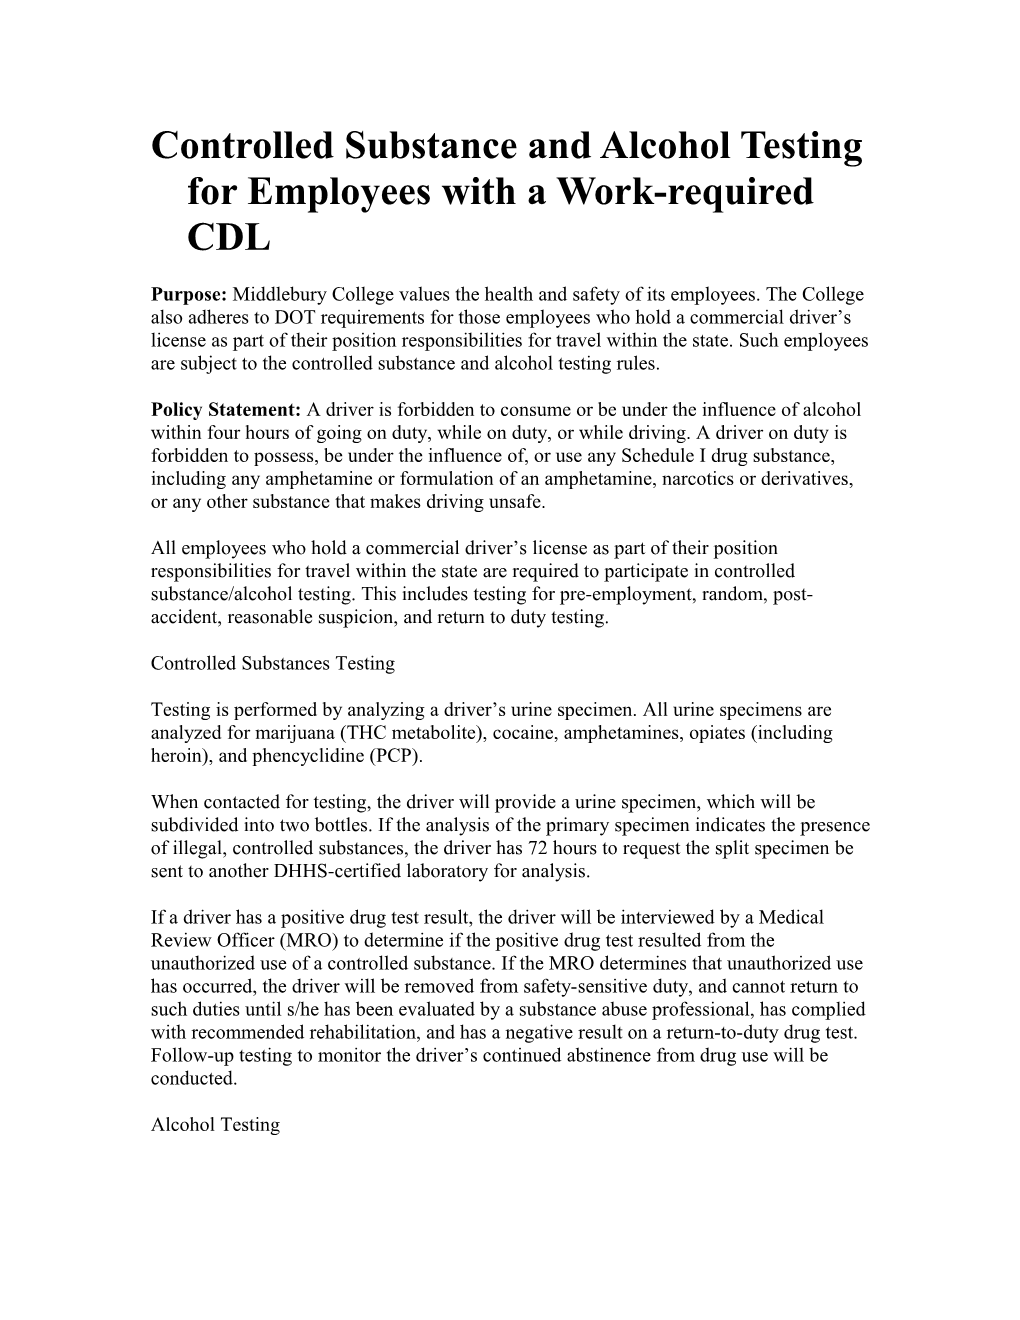 Controlled Substance and Alcohol Testing for Employees with a Work-Required CDL